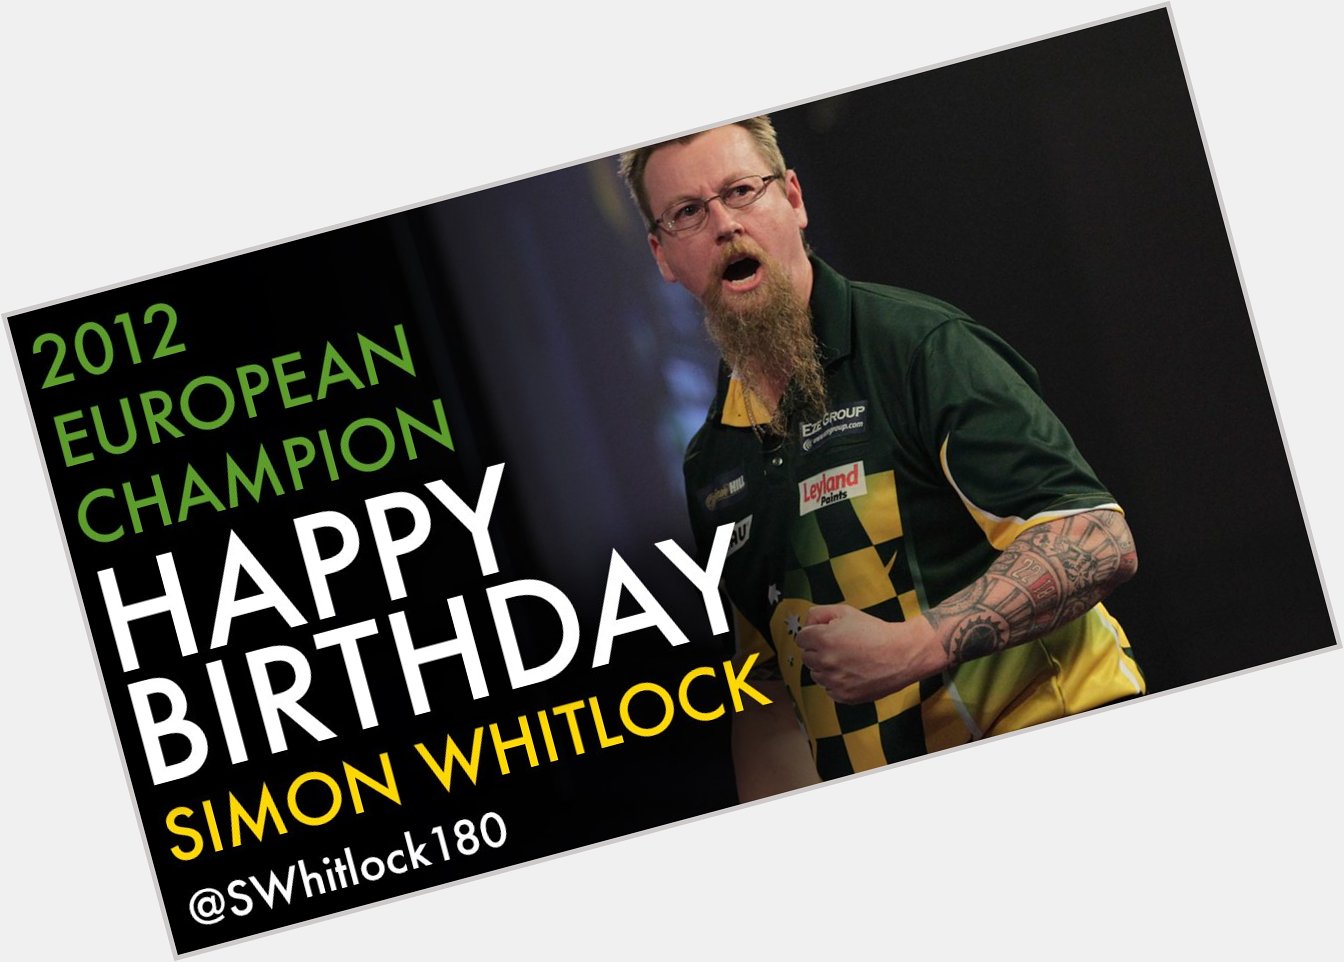 HAPPY BIRTHDAY to Simon Whitlock, who turns 48 today! Can he get a birthday victory against Chris Quantock? 